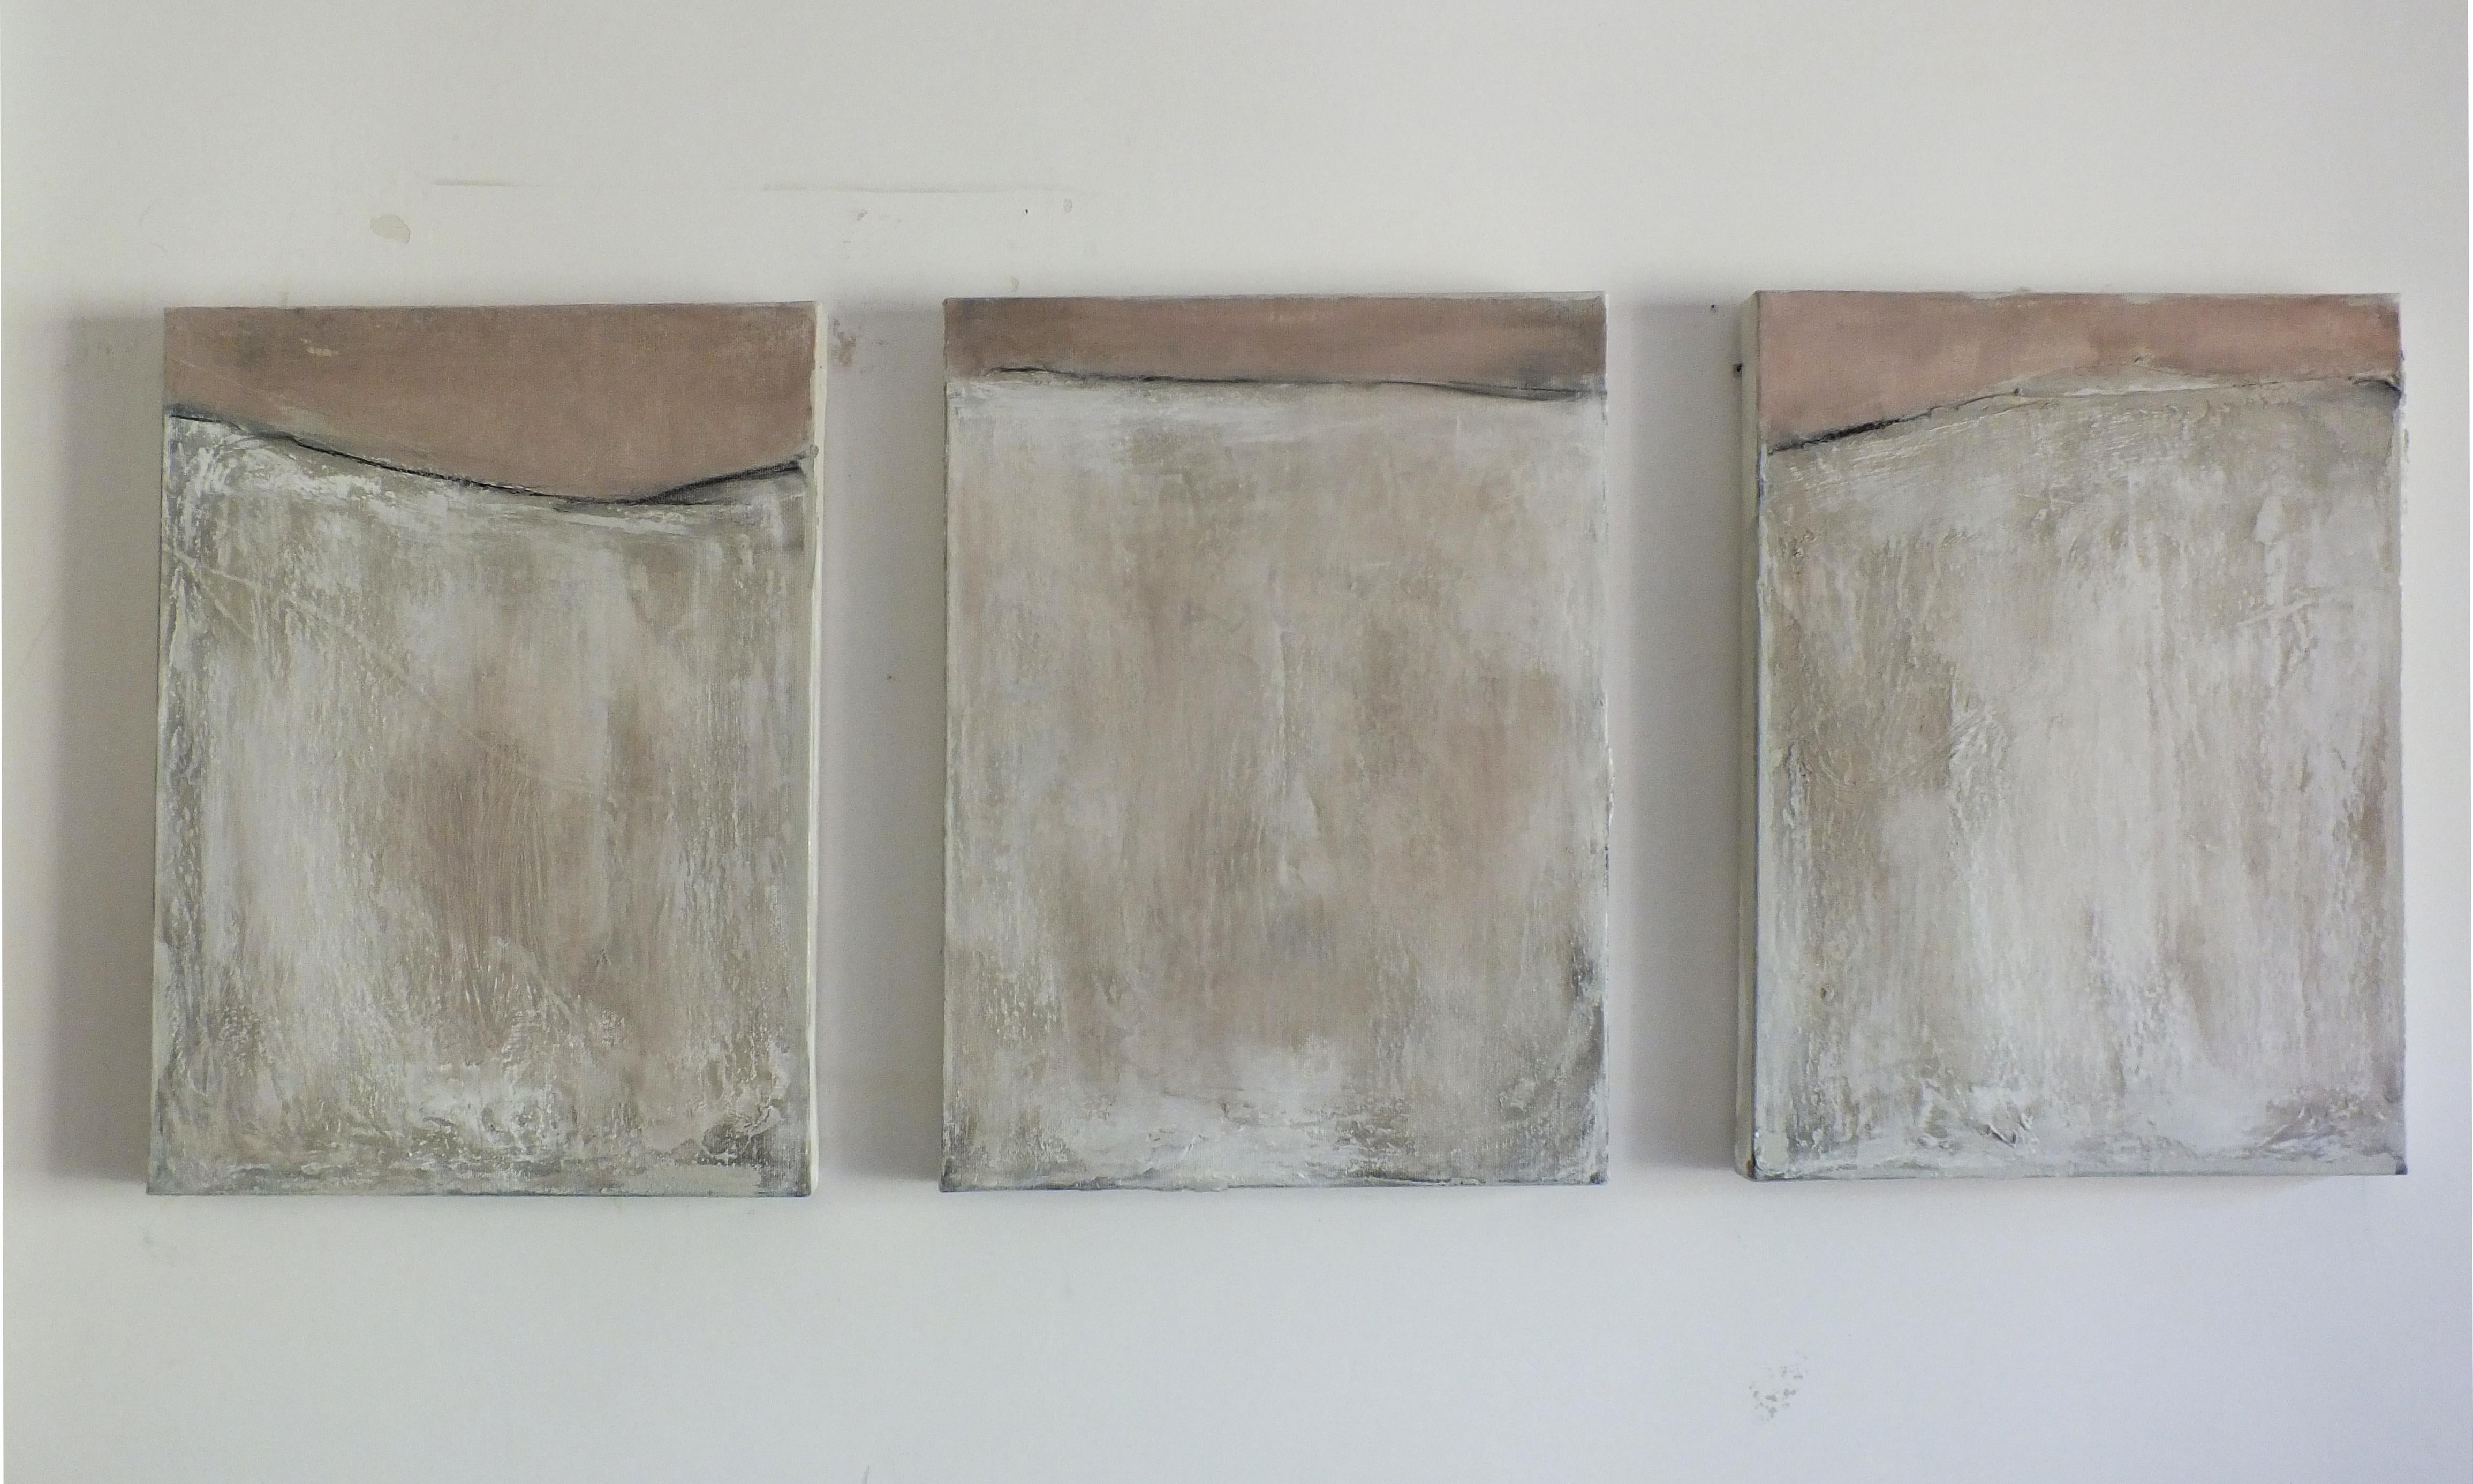 Marilina Marchica Landscape Painting - " Landscape Triptych" Minimalist Art , Relief Paint on Canvas  Made in Italy